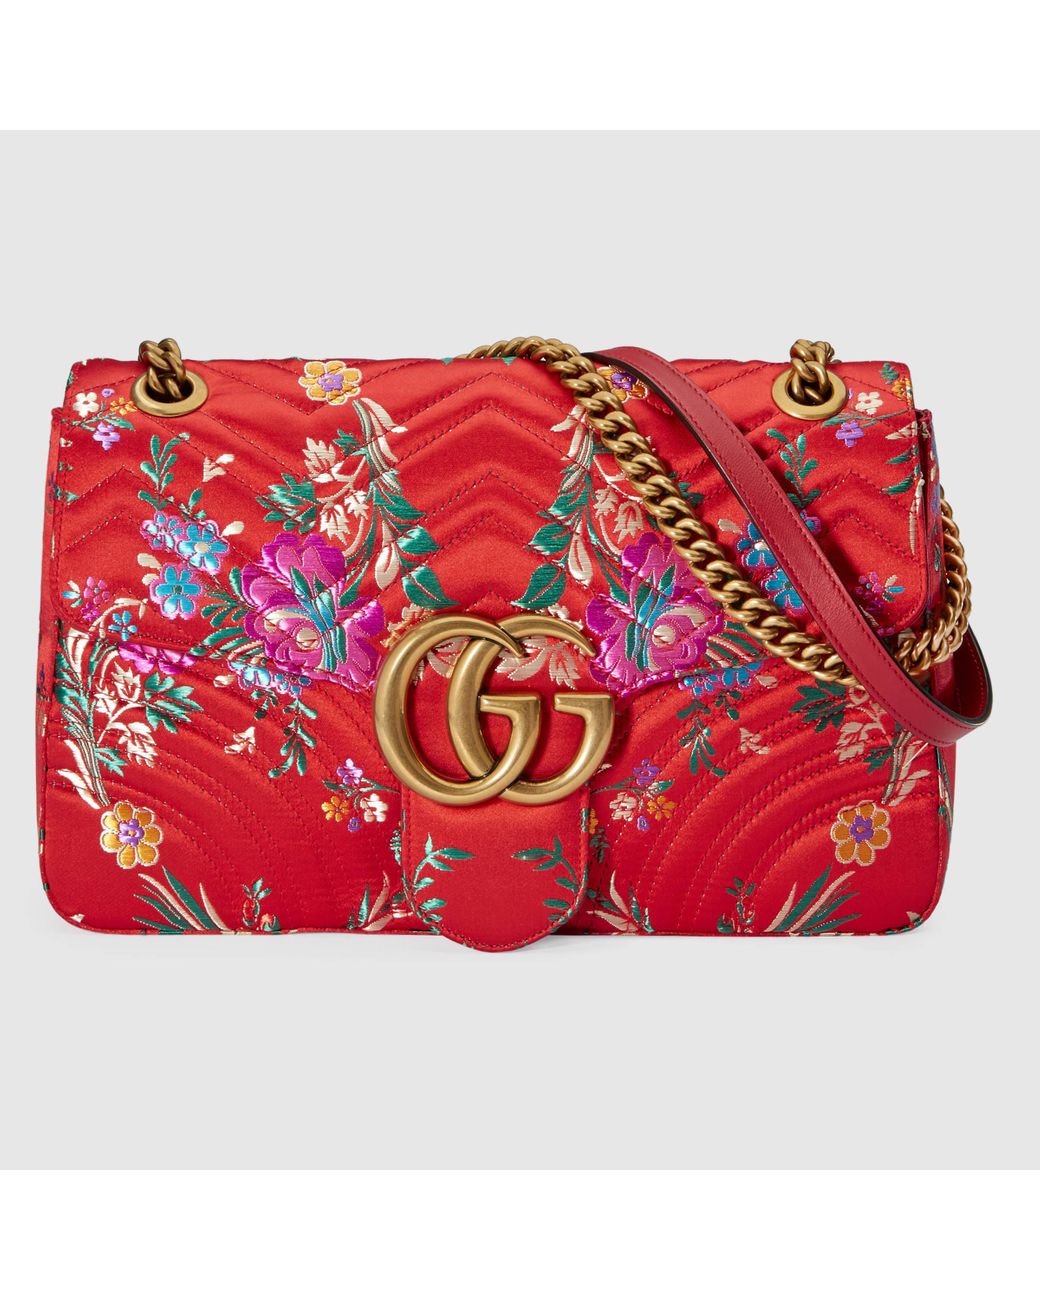 Gucci Gg Marmont Floral Jacquard Shoulder Bag in Red | Lyst